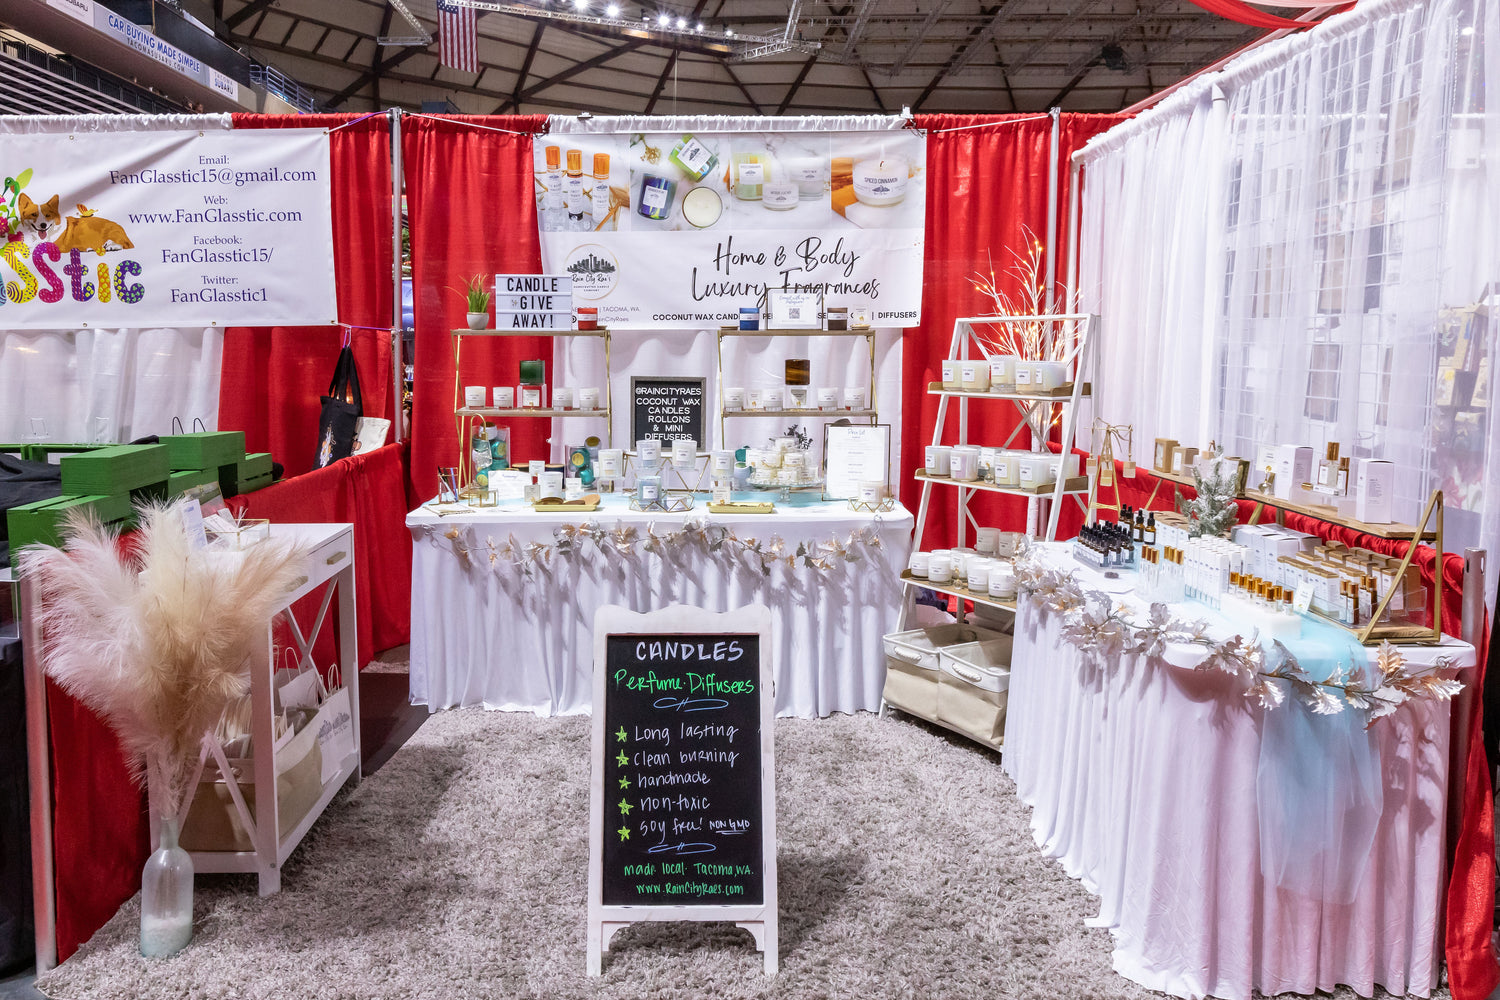 Trade Show Event market vendor booth set up for Rain City Rae's at Tacoma Dome Holiday Food and Gift Festival